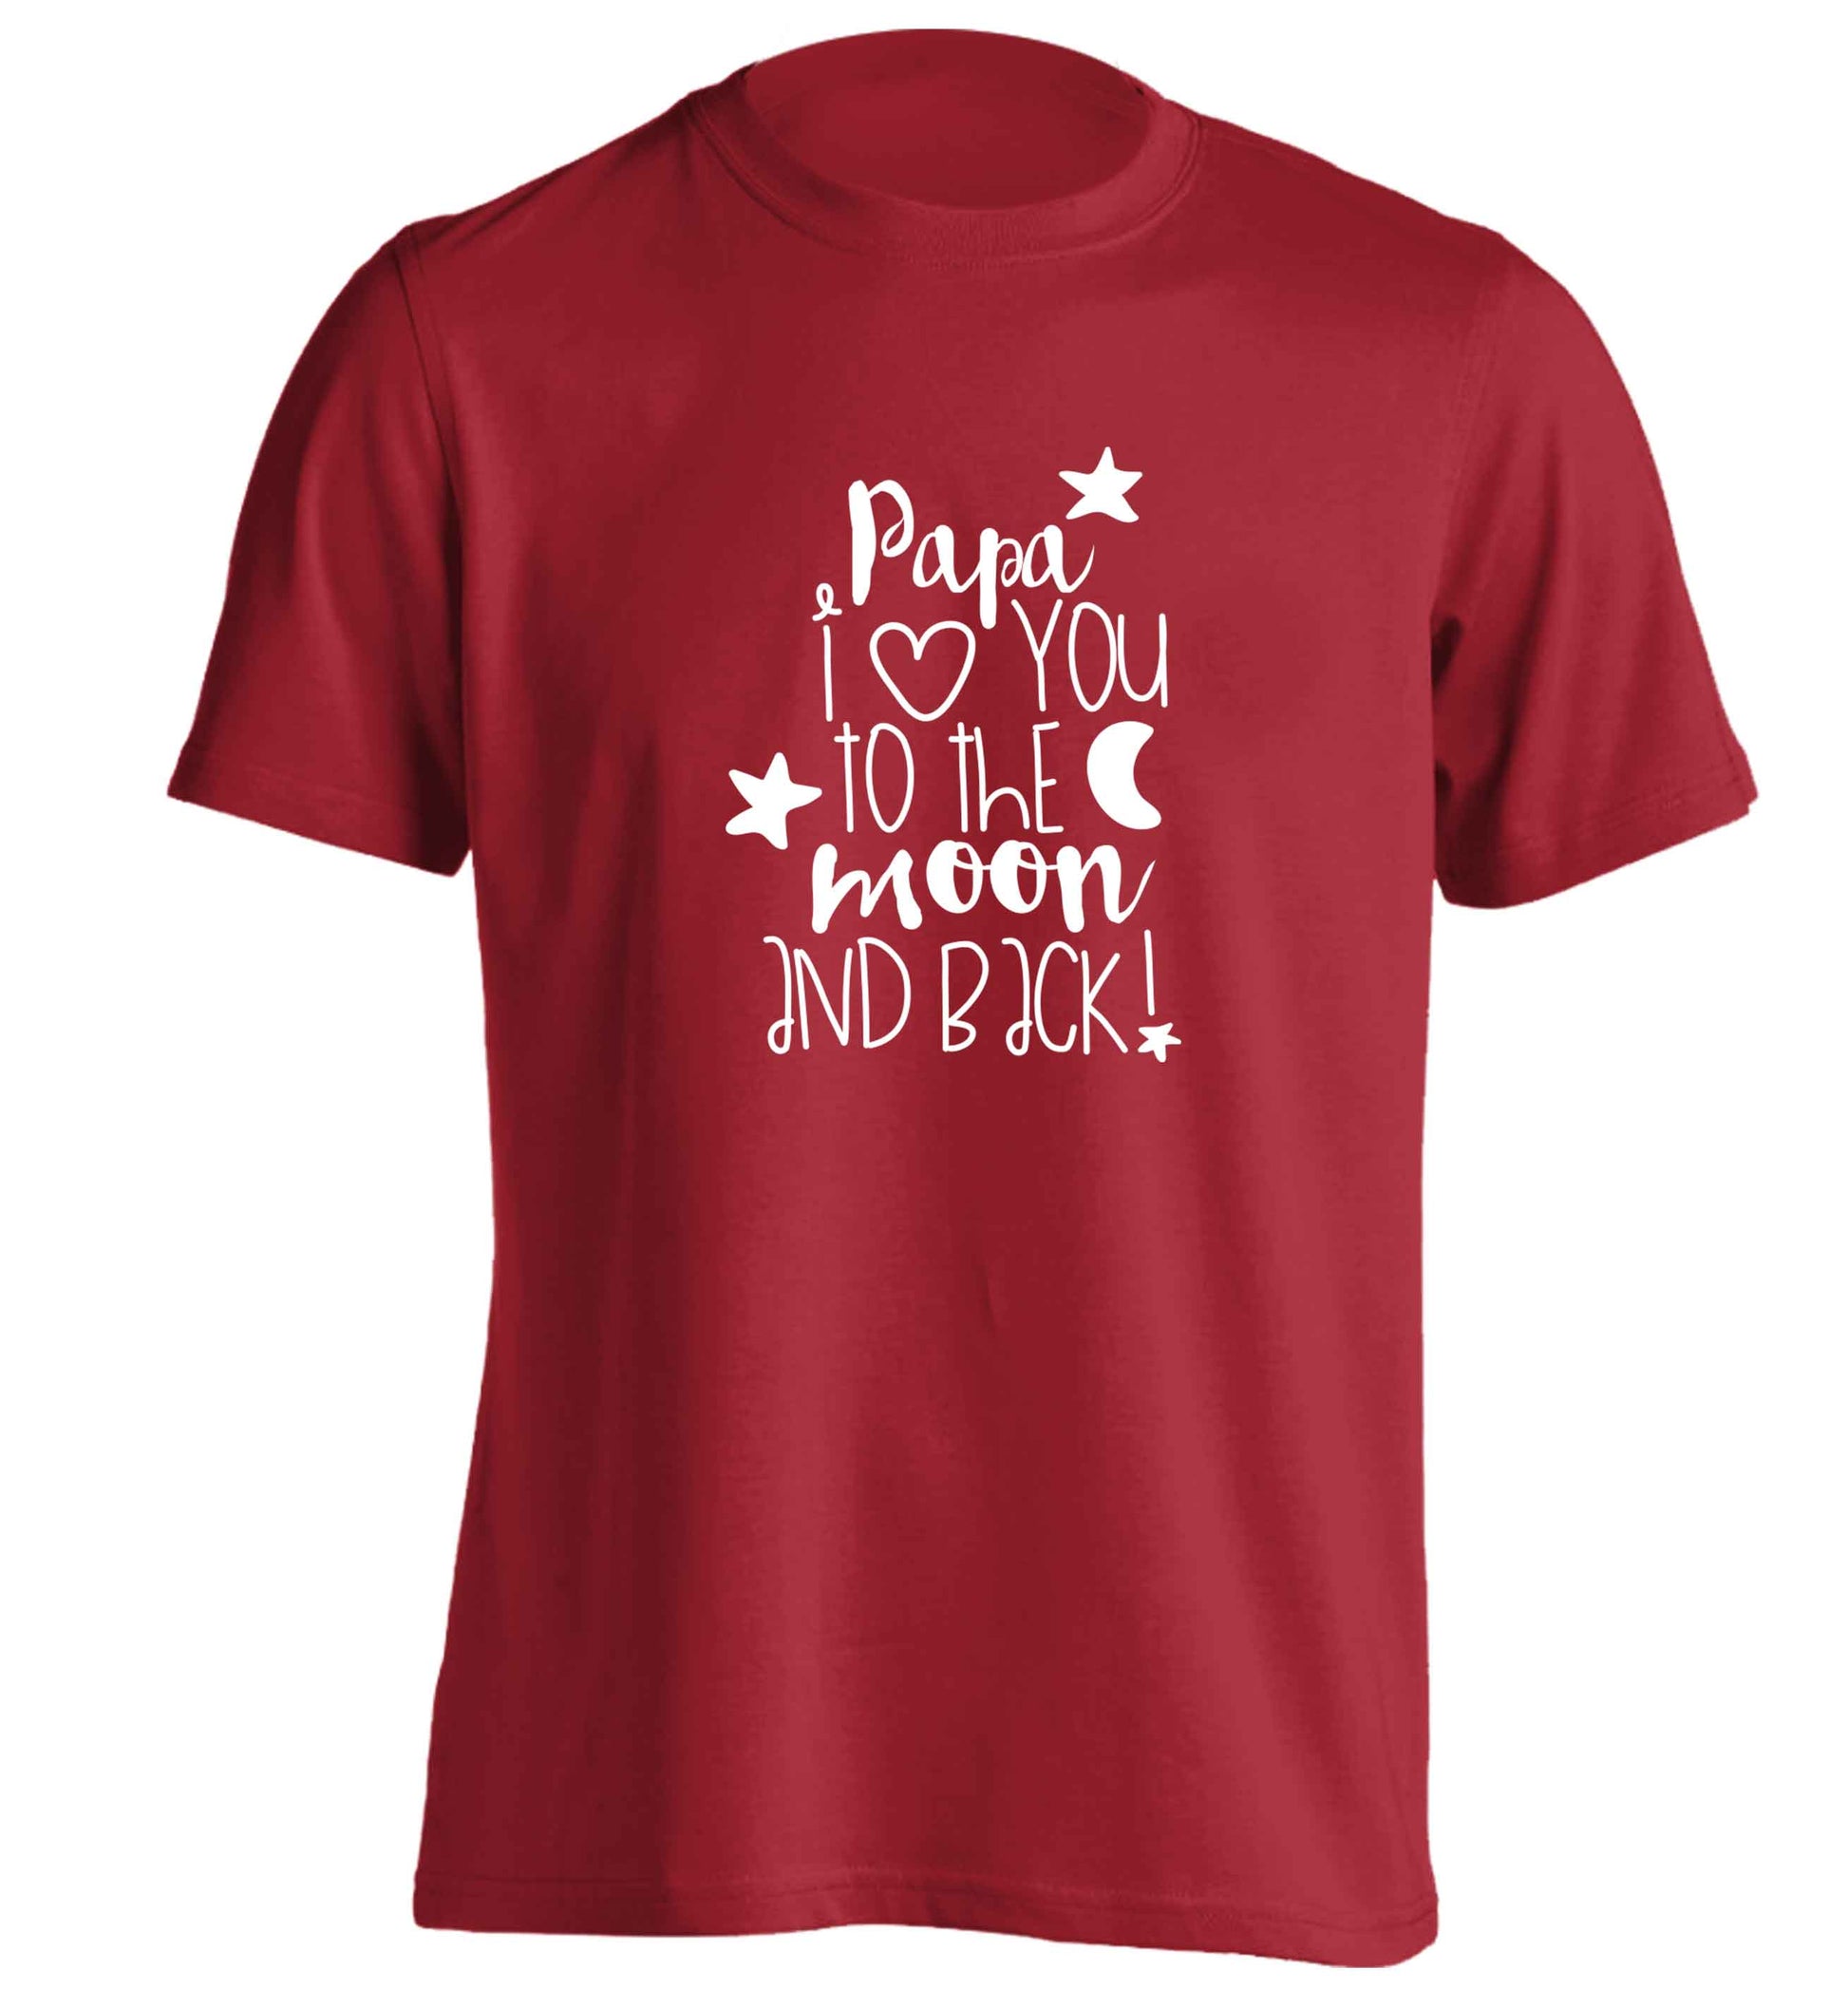 Papa I love you to the moon and back adults unisex red Tshirt 2XL